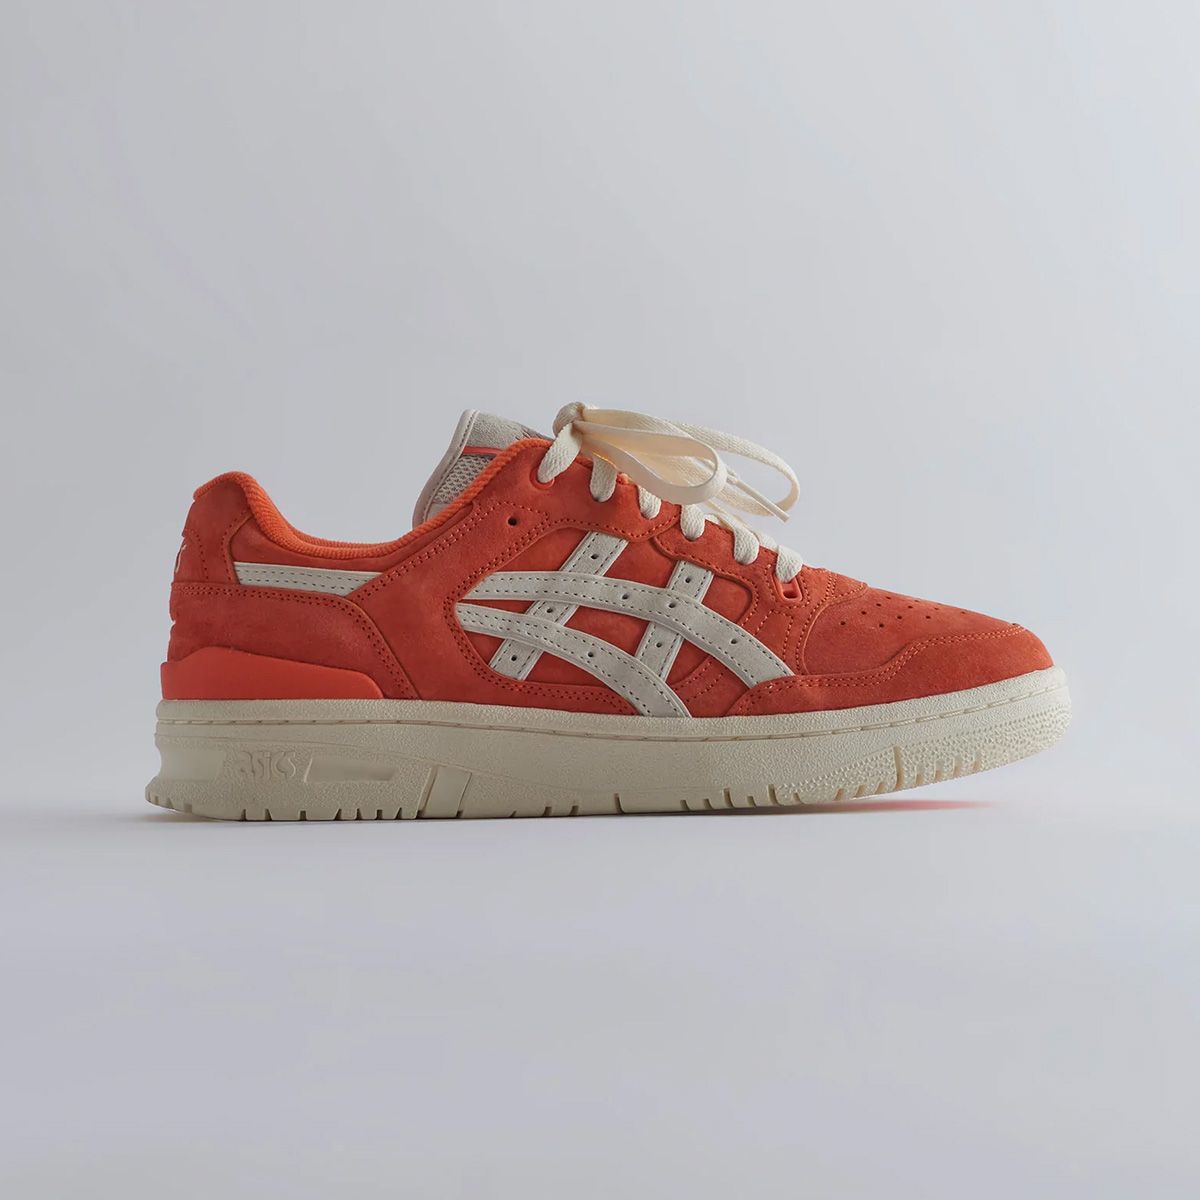 Where to Buy the Ronnie Fieg x ASICS EX89 Collection | HOUSE OF HEAT